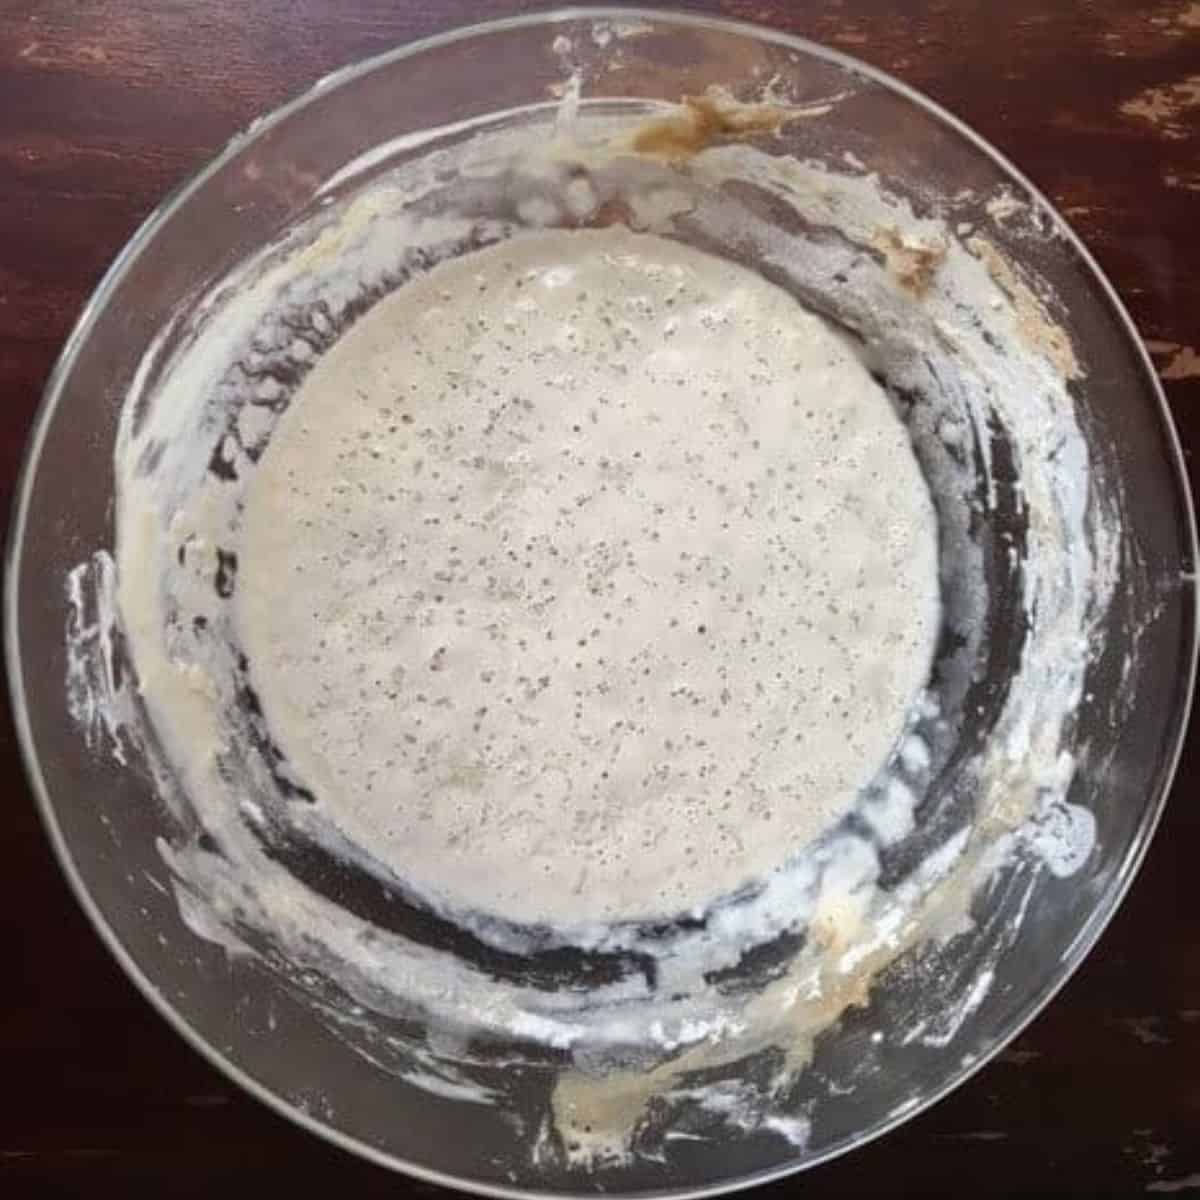 Sourdough starter on day 5, after feeding.